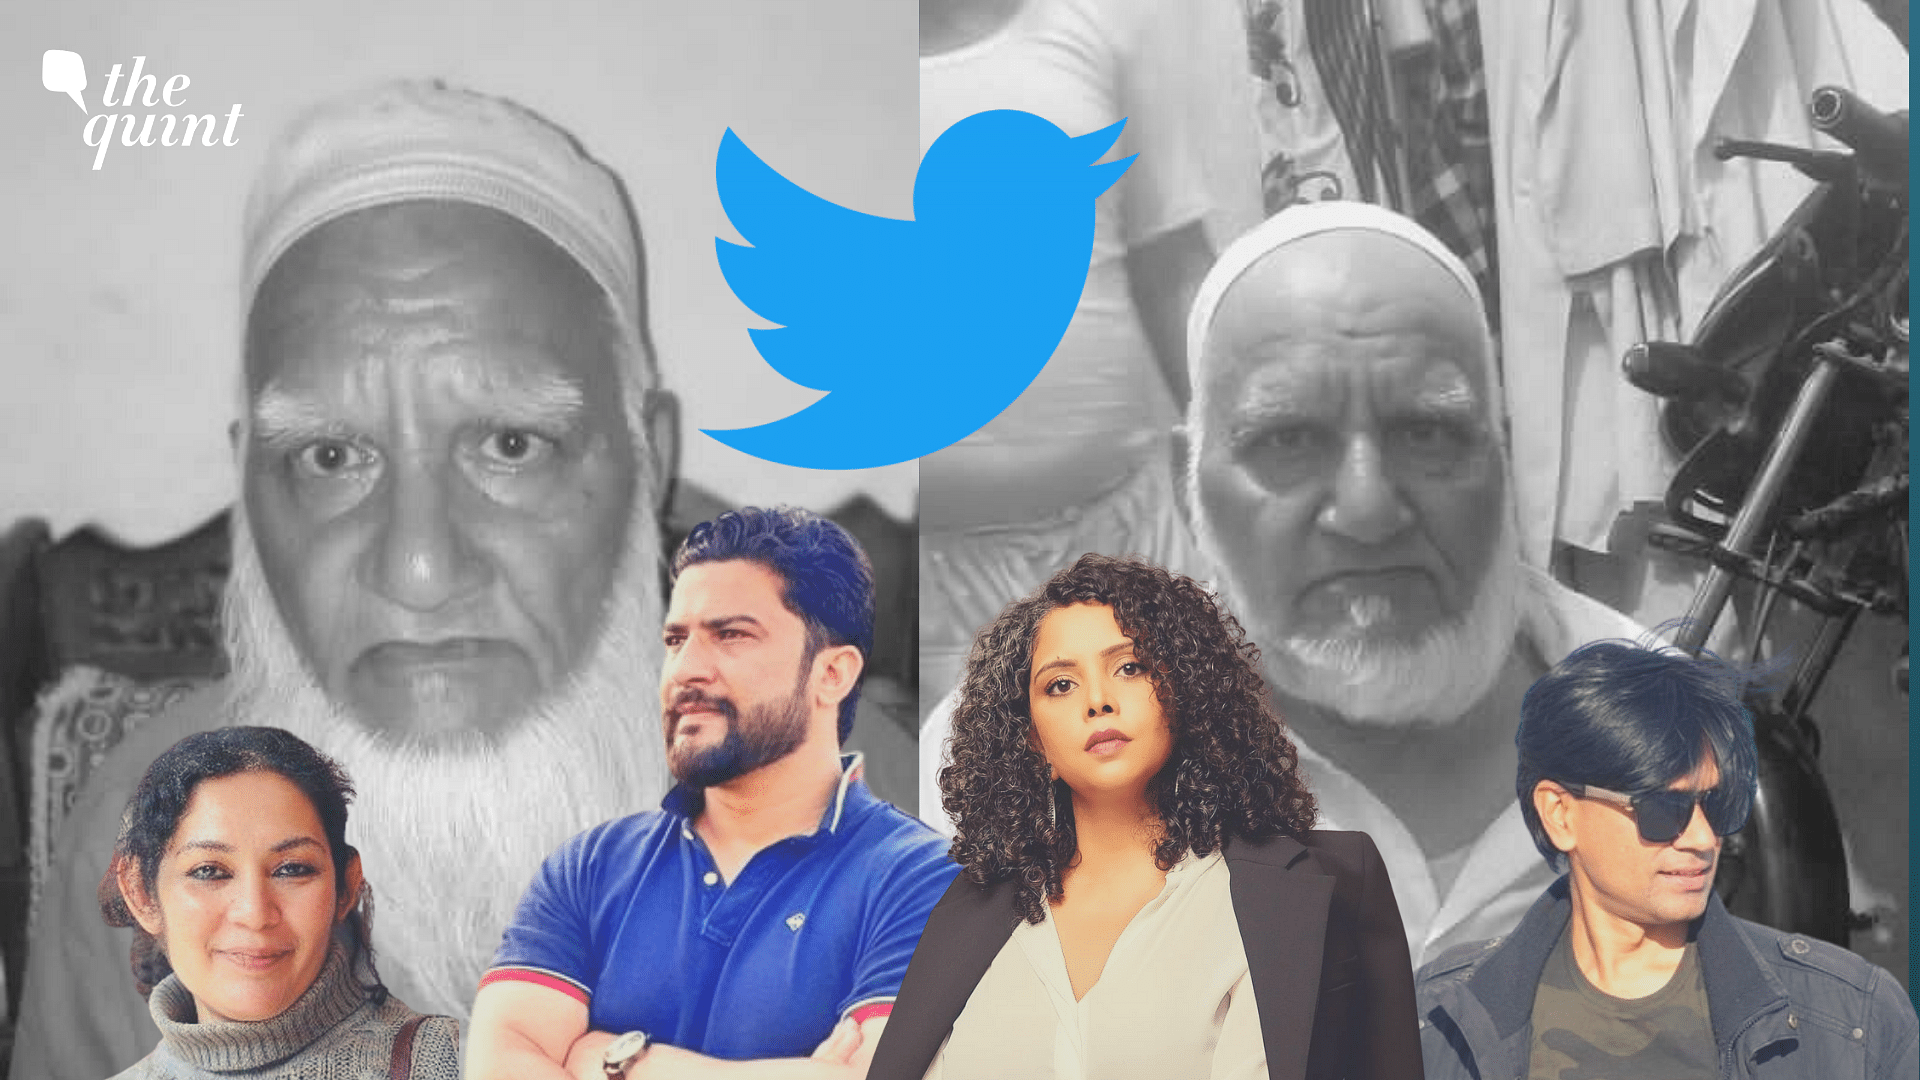 Others in the FIR include The Wire, Rana Ayyub, Mohammad Zubair, Dr Shama Mohammed, and Saba Naqvi.